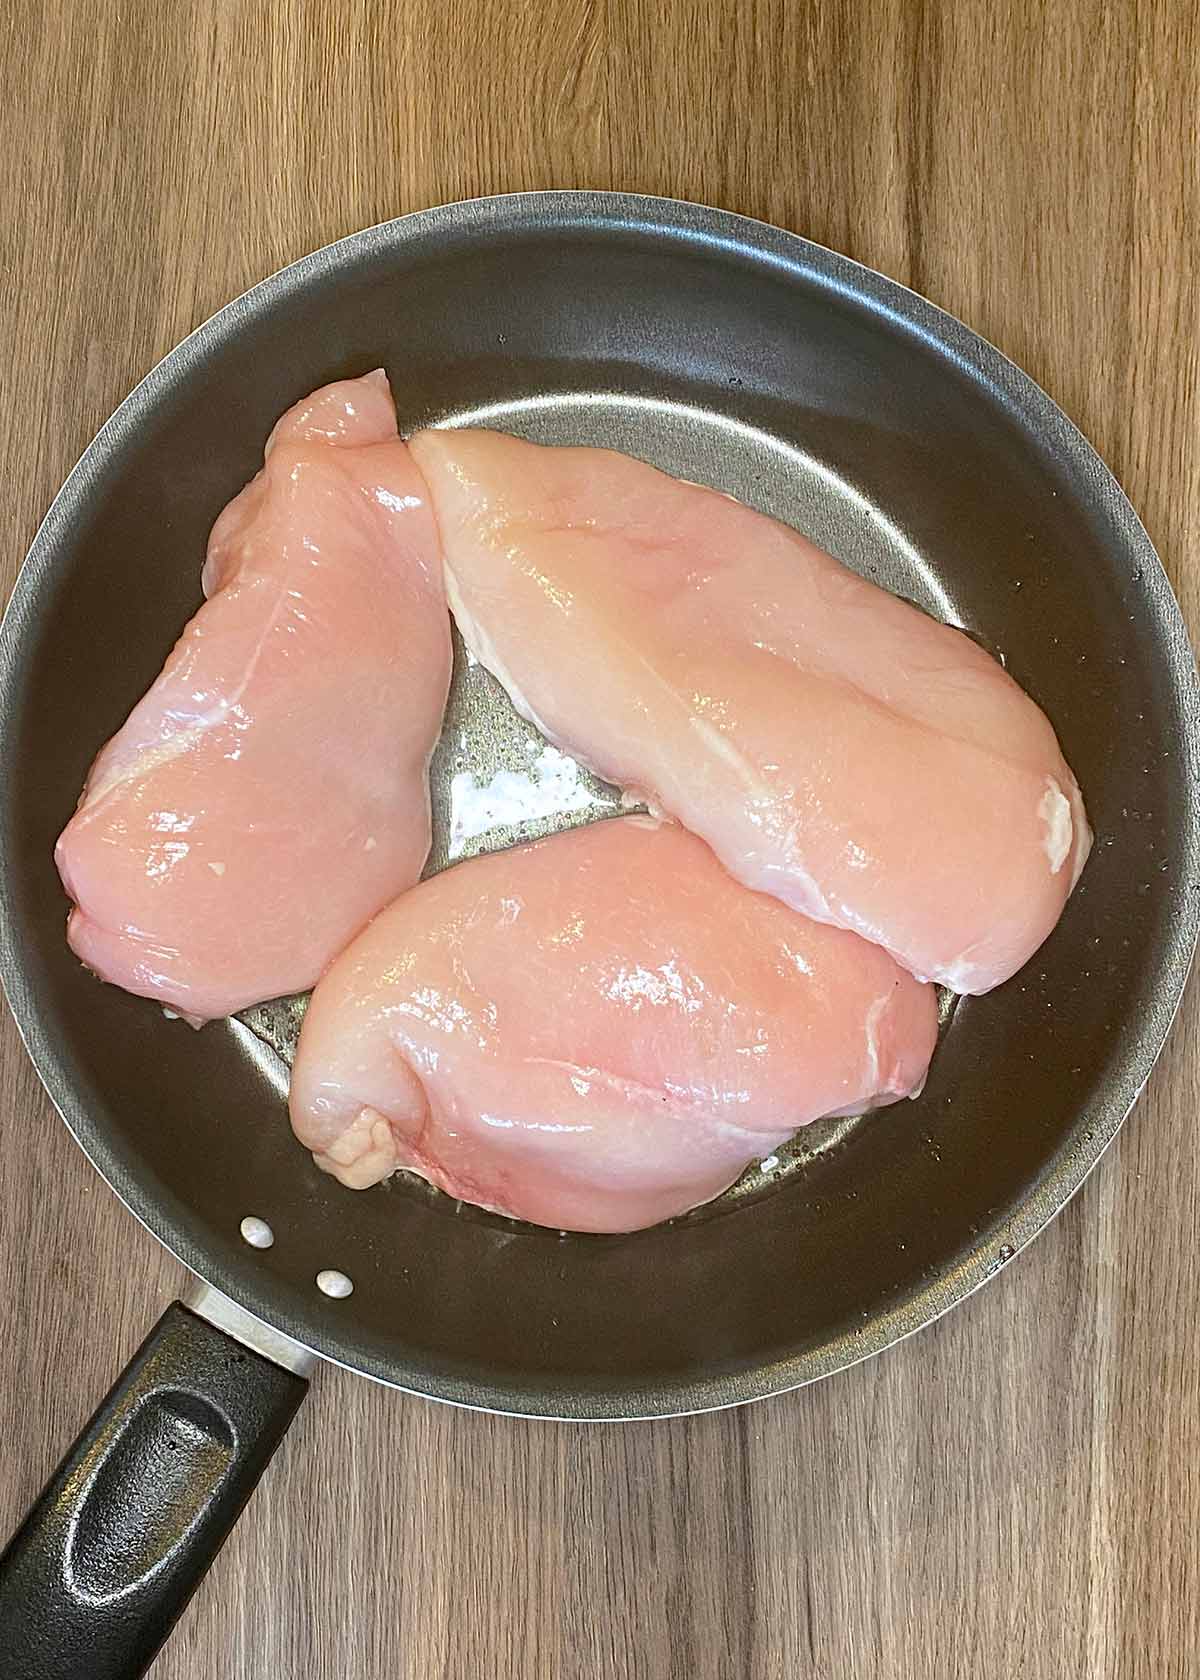 A frying pan with chicken breasts cooking in it.